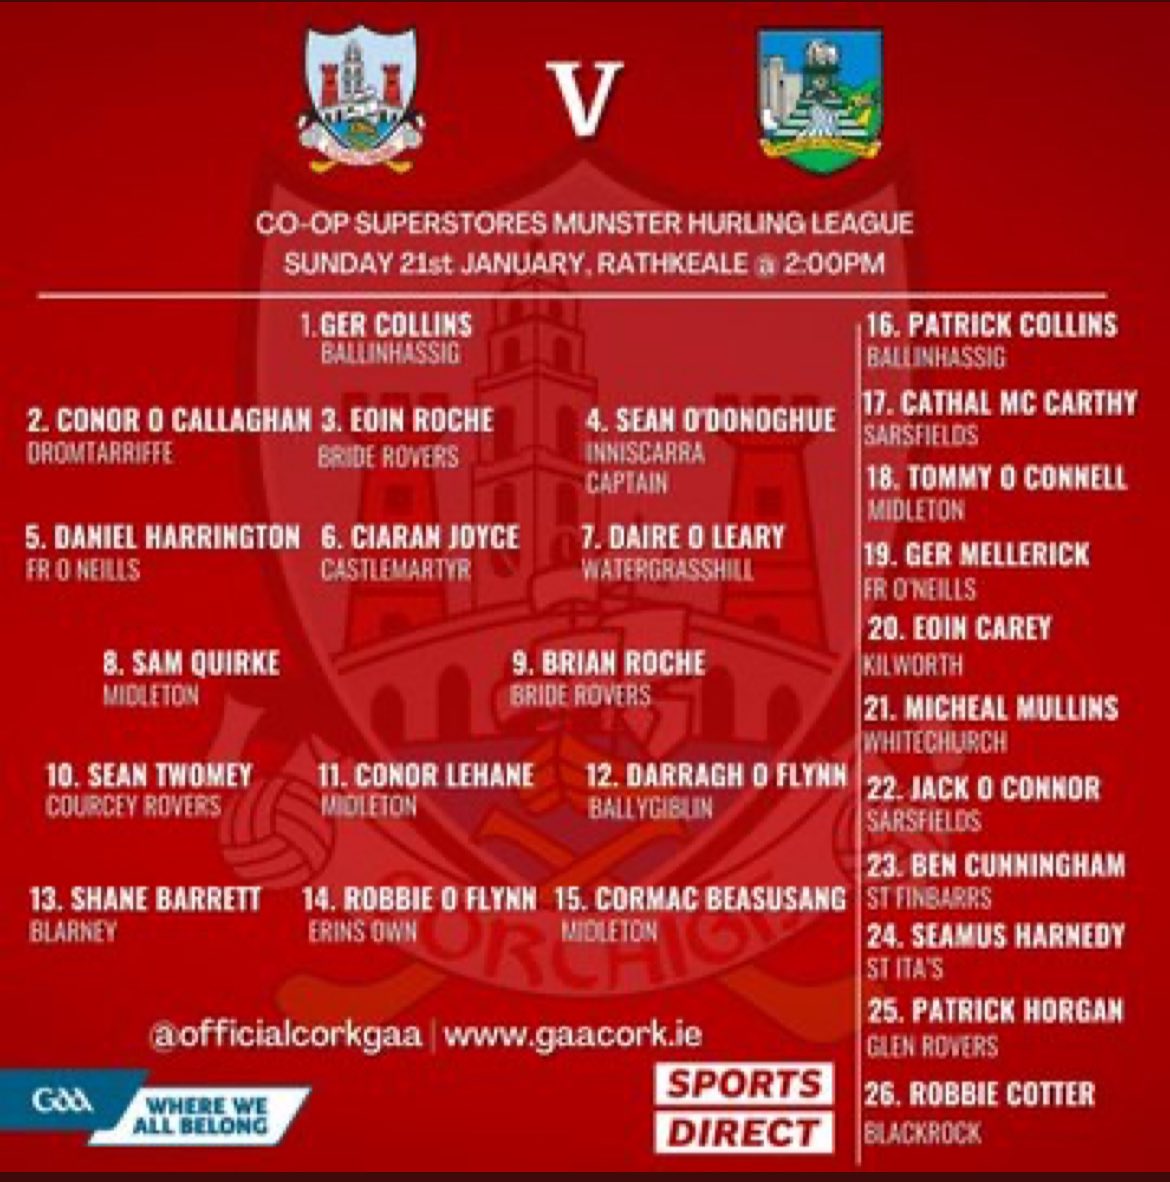 The Cork Senior Hurling team to play Limerick in the Co Op Superstores Munster League has been also been announced.